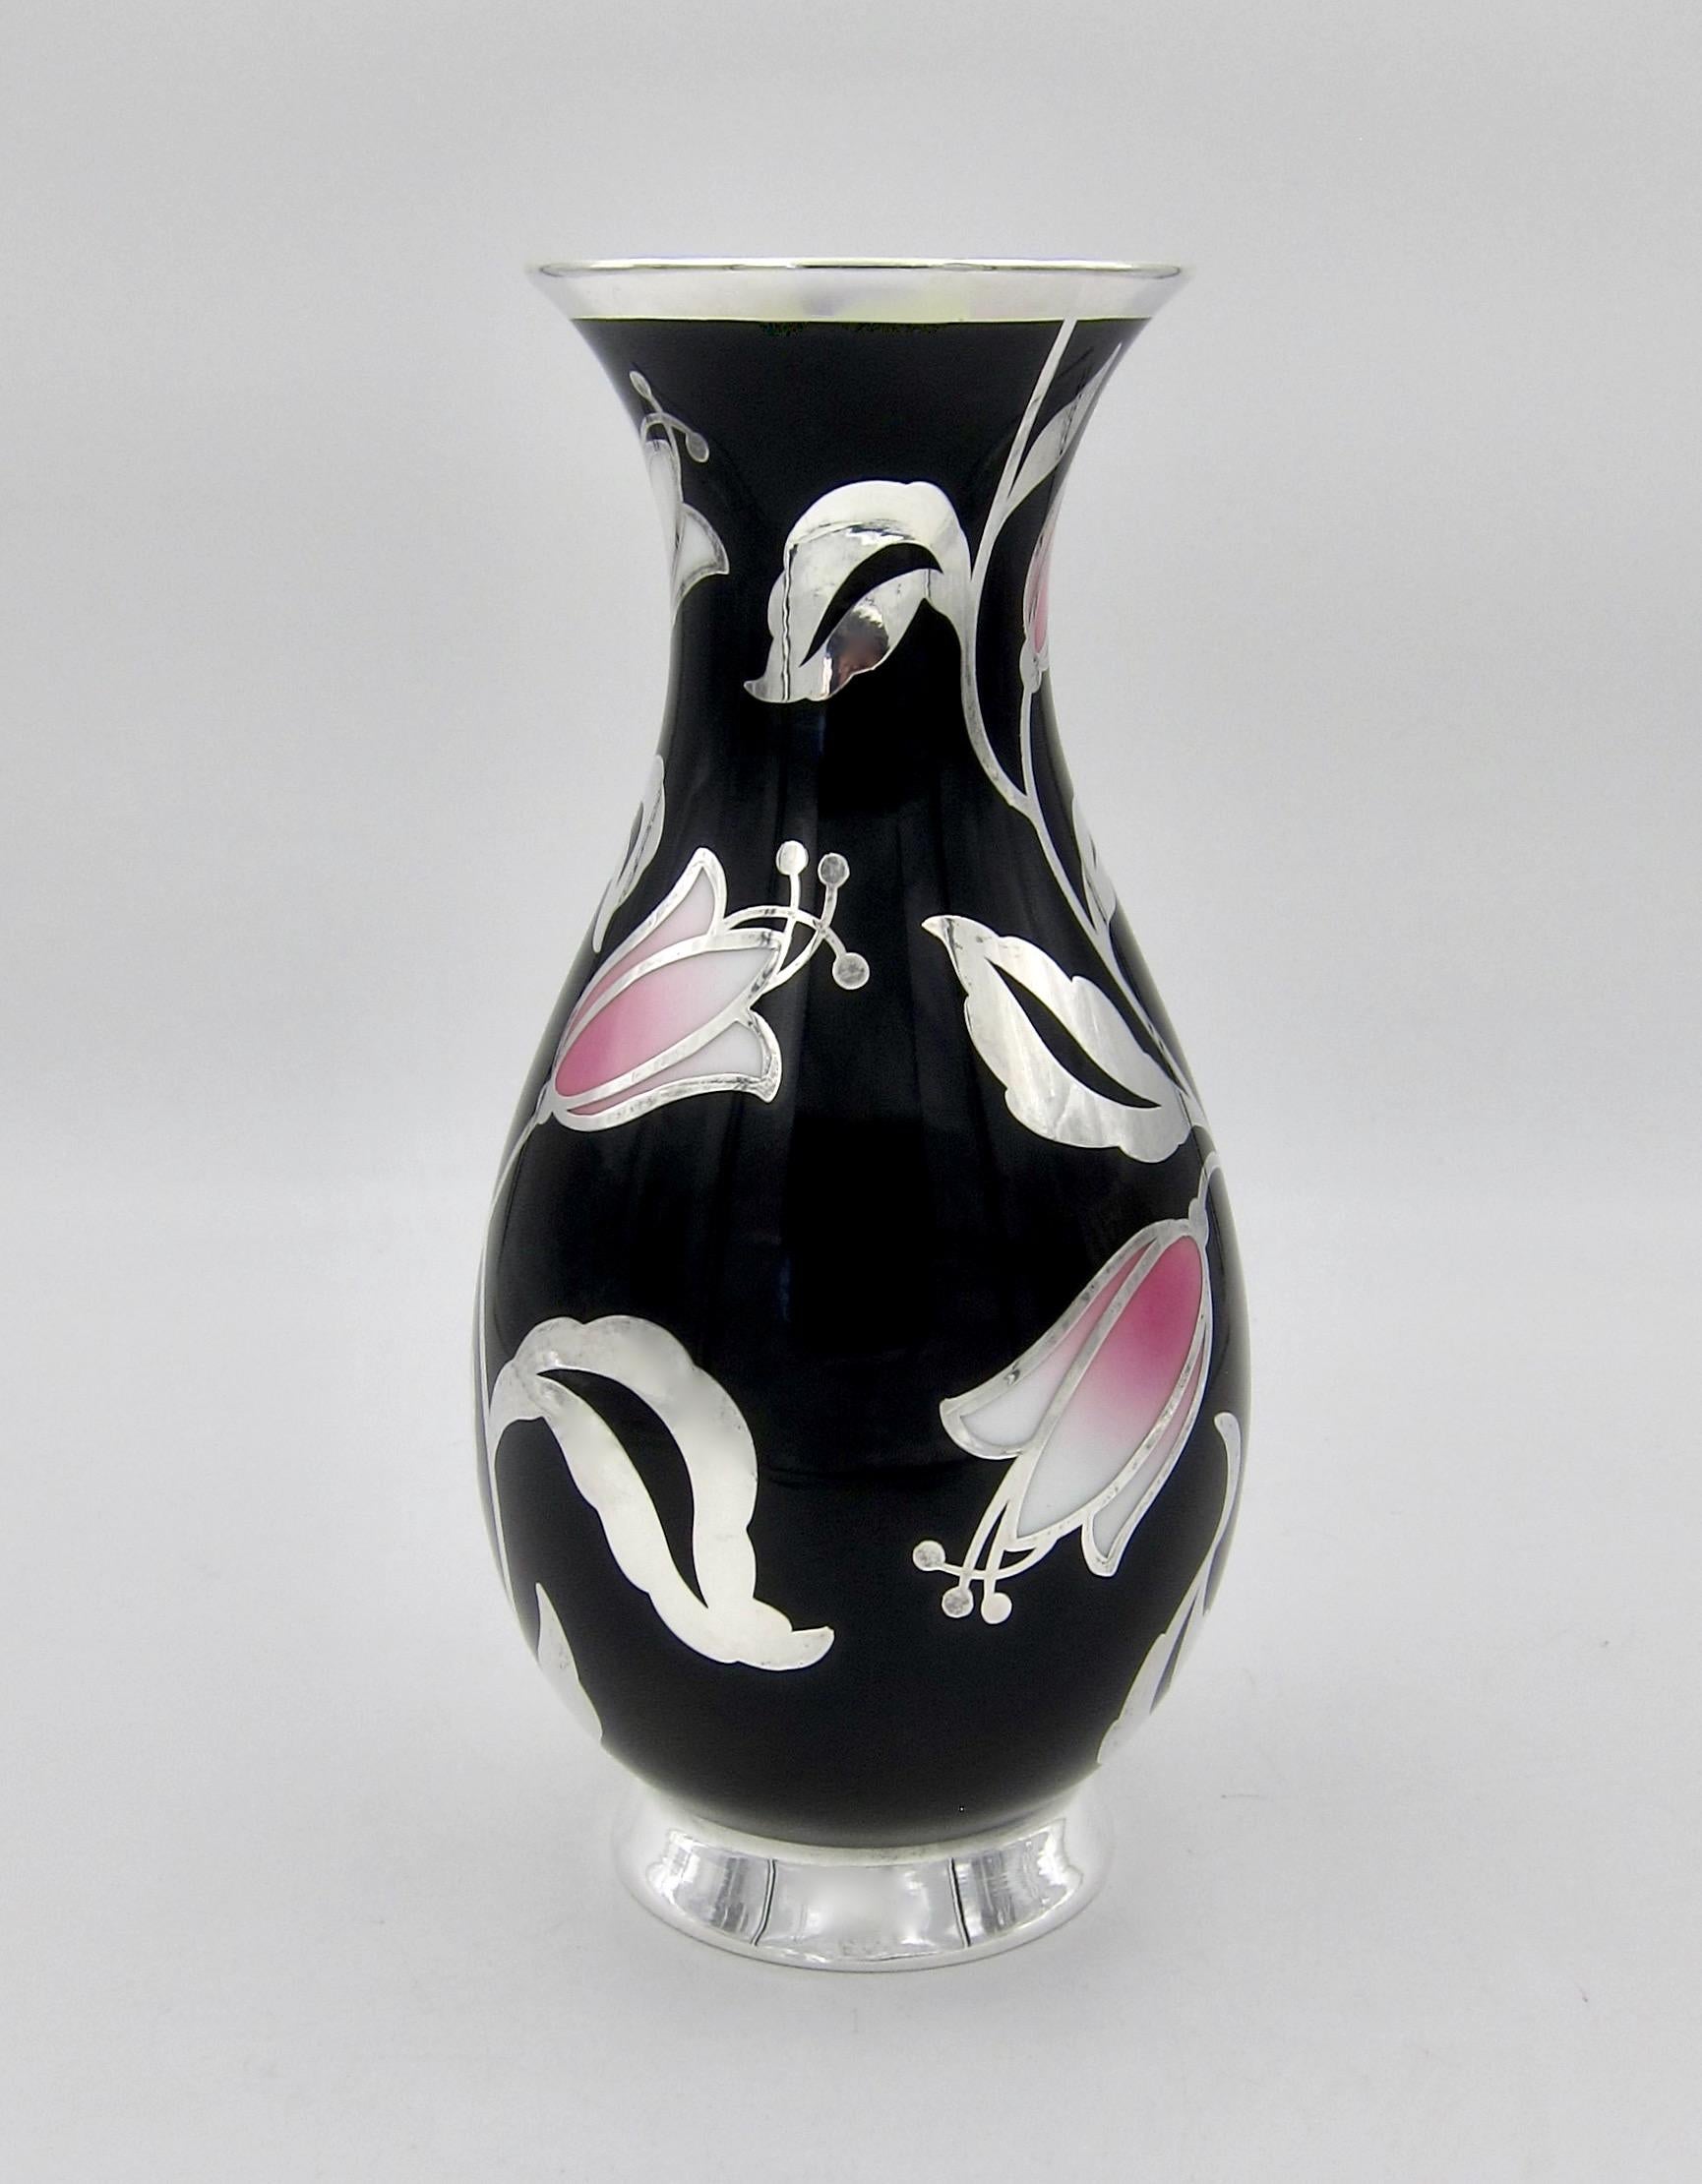 Glazed German Porcelain Vase with Spahr Pure Silver Overlay and Pink Tulips